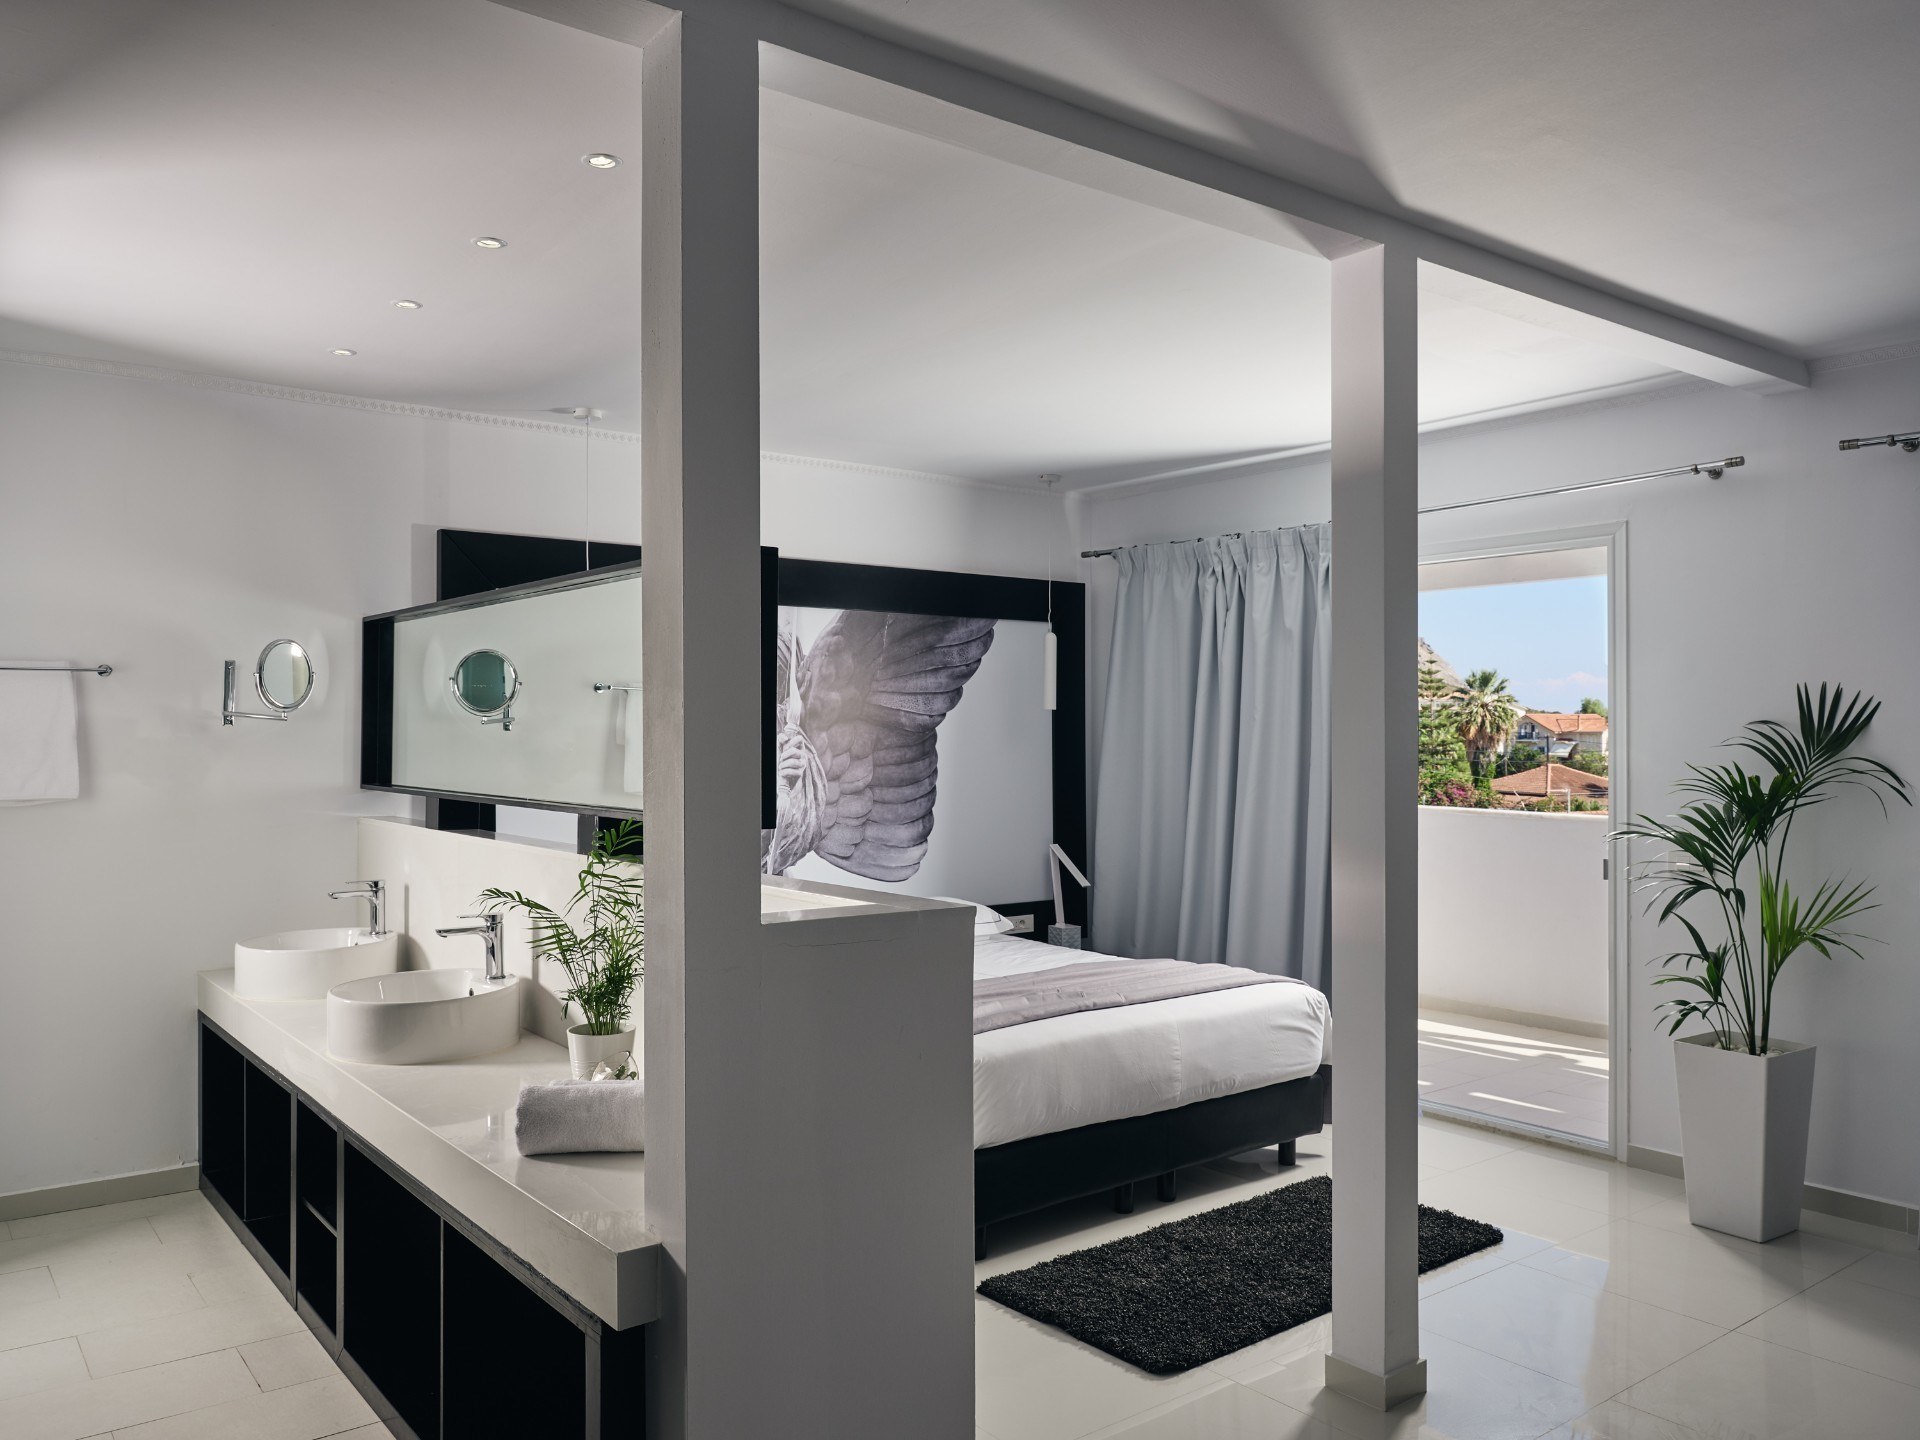 Meandros Boutique and Spa Zakynthos 